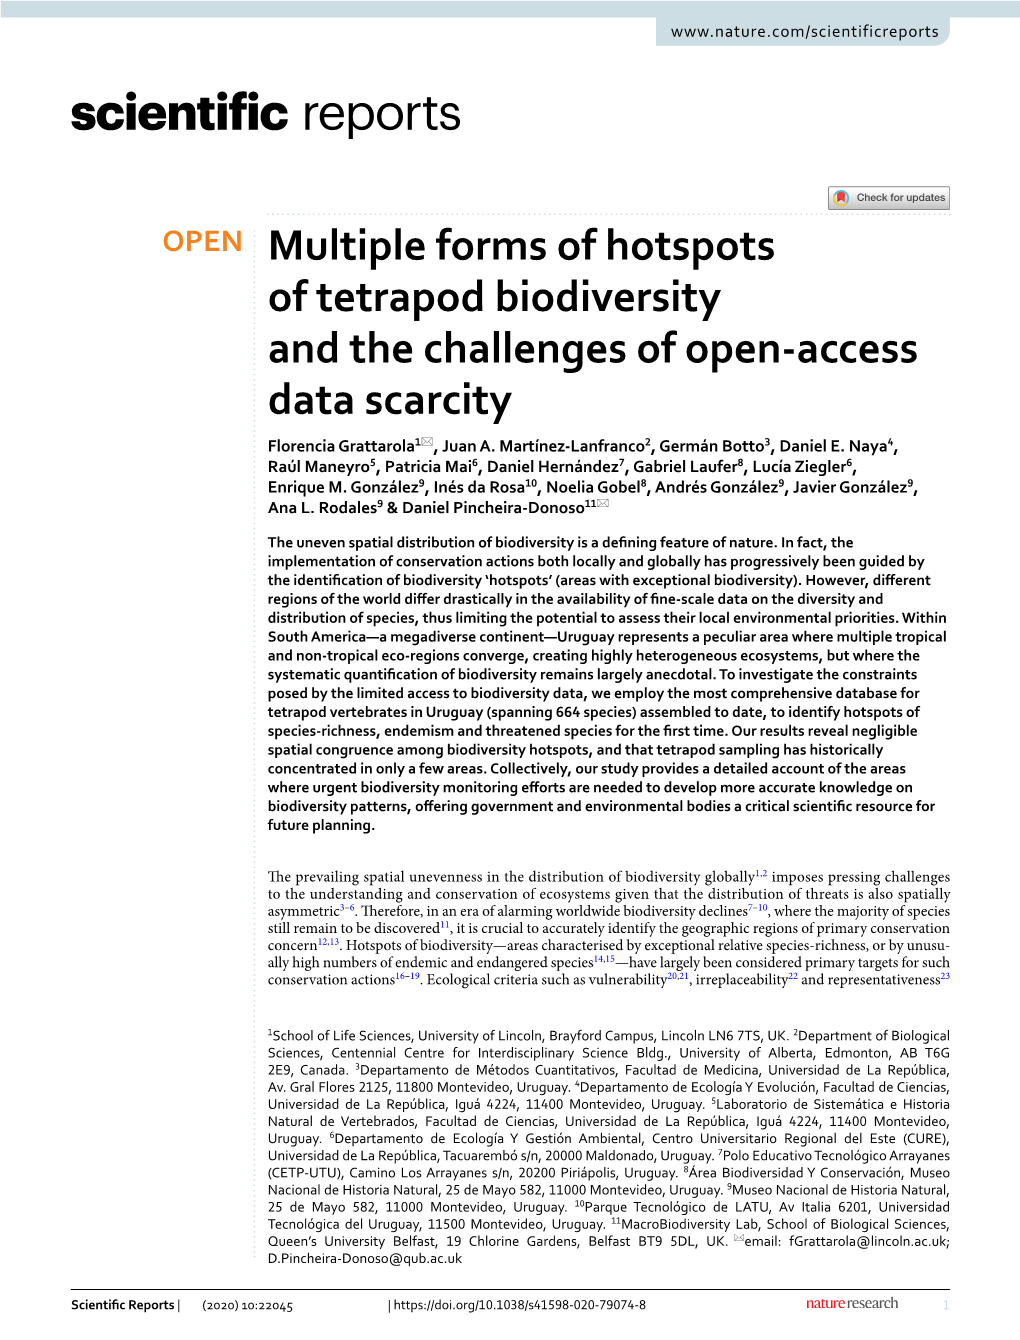 Multiple Forms of Hotspots of Tetrapod Biodiversity and the Challenges of Open‑Access Data Scarcity Florencia Grattarola1*, Juan A